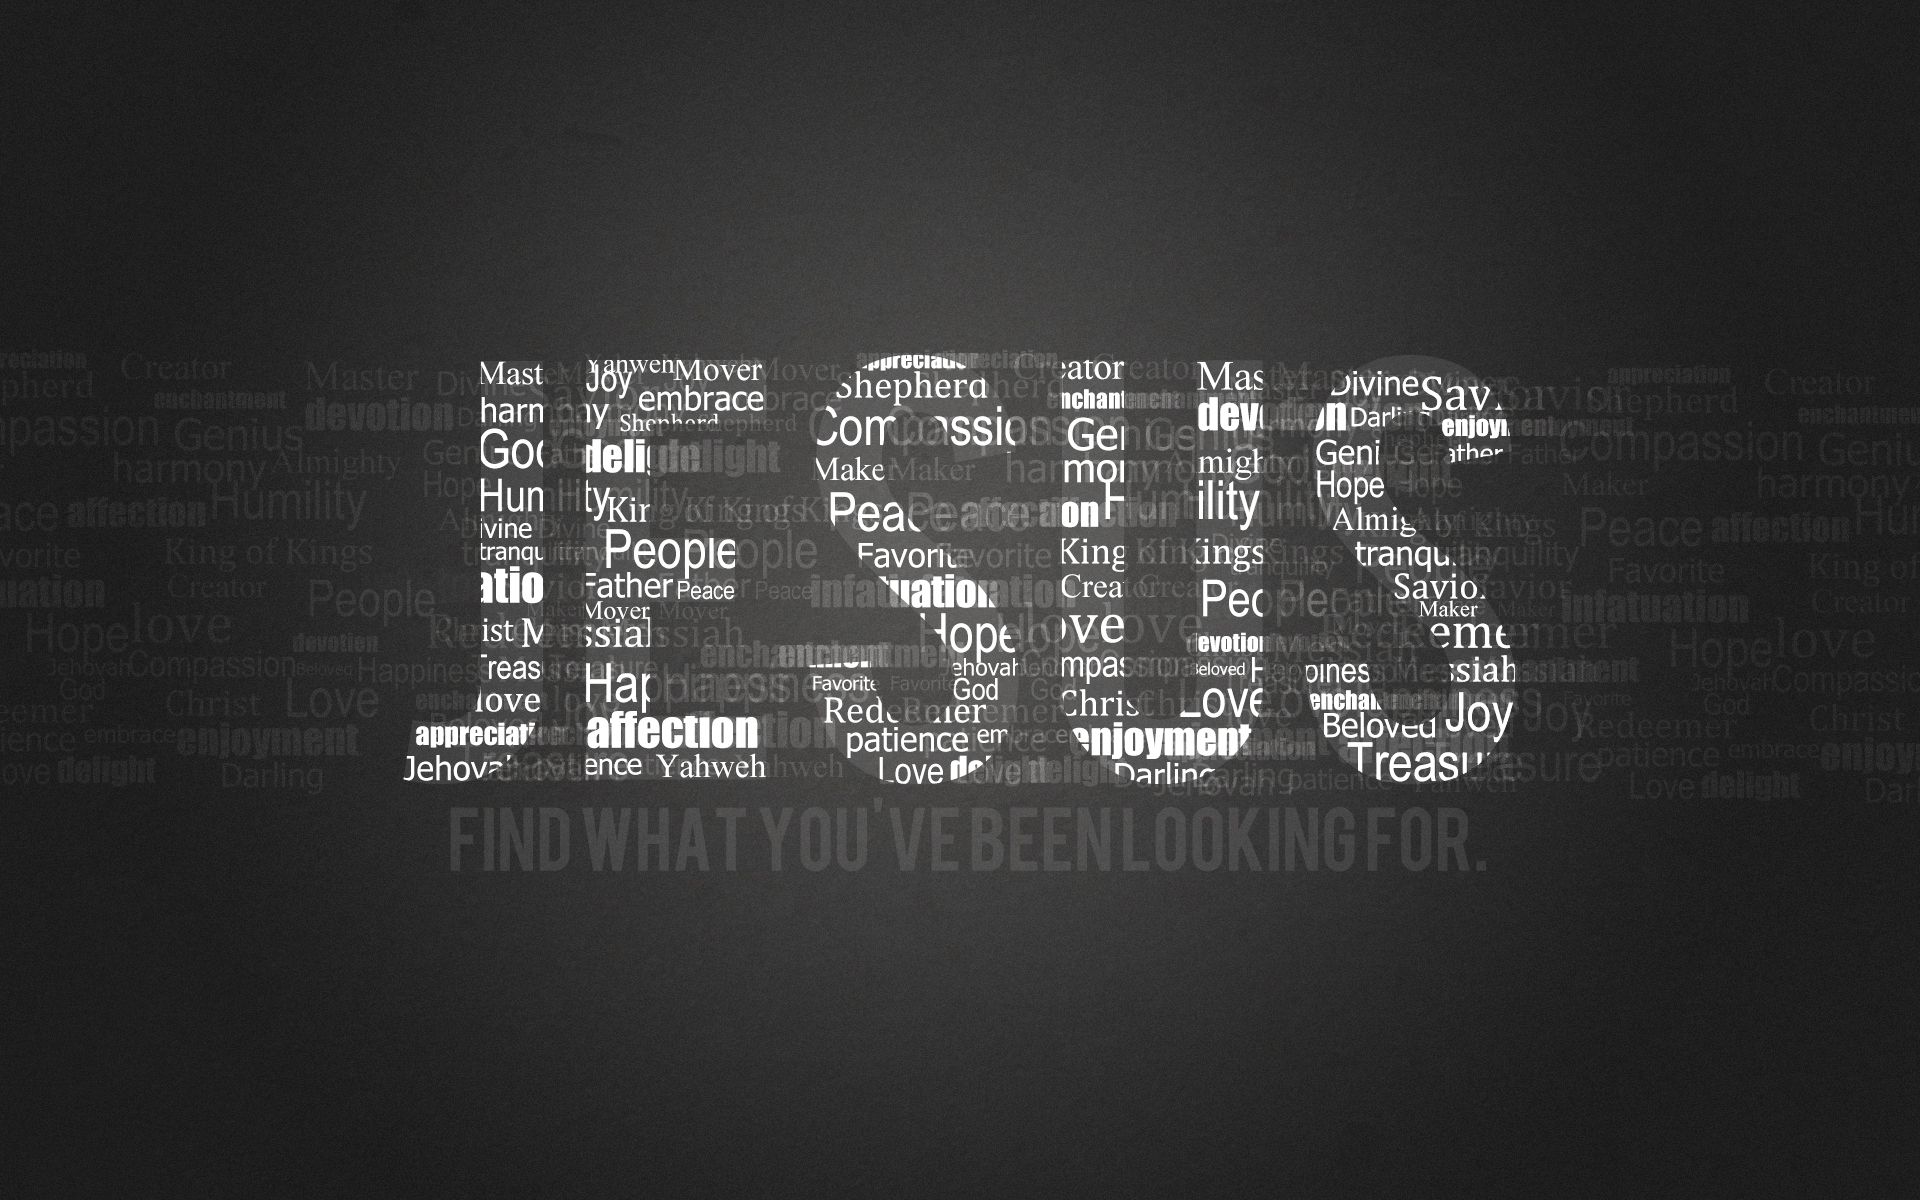 Jesus Wallpapers Archives - Page 3 of 5 - Wallpaper